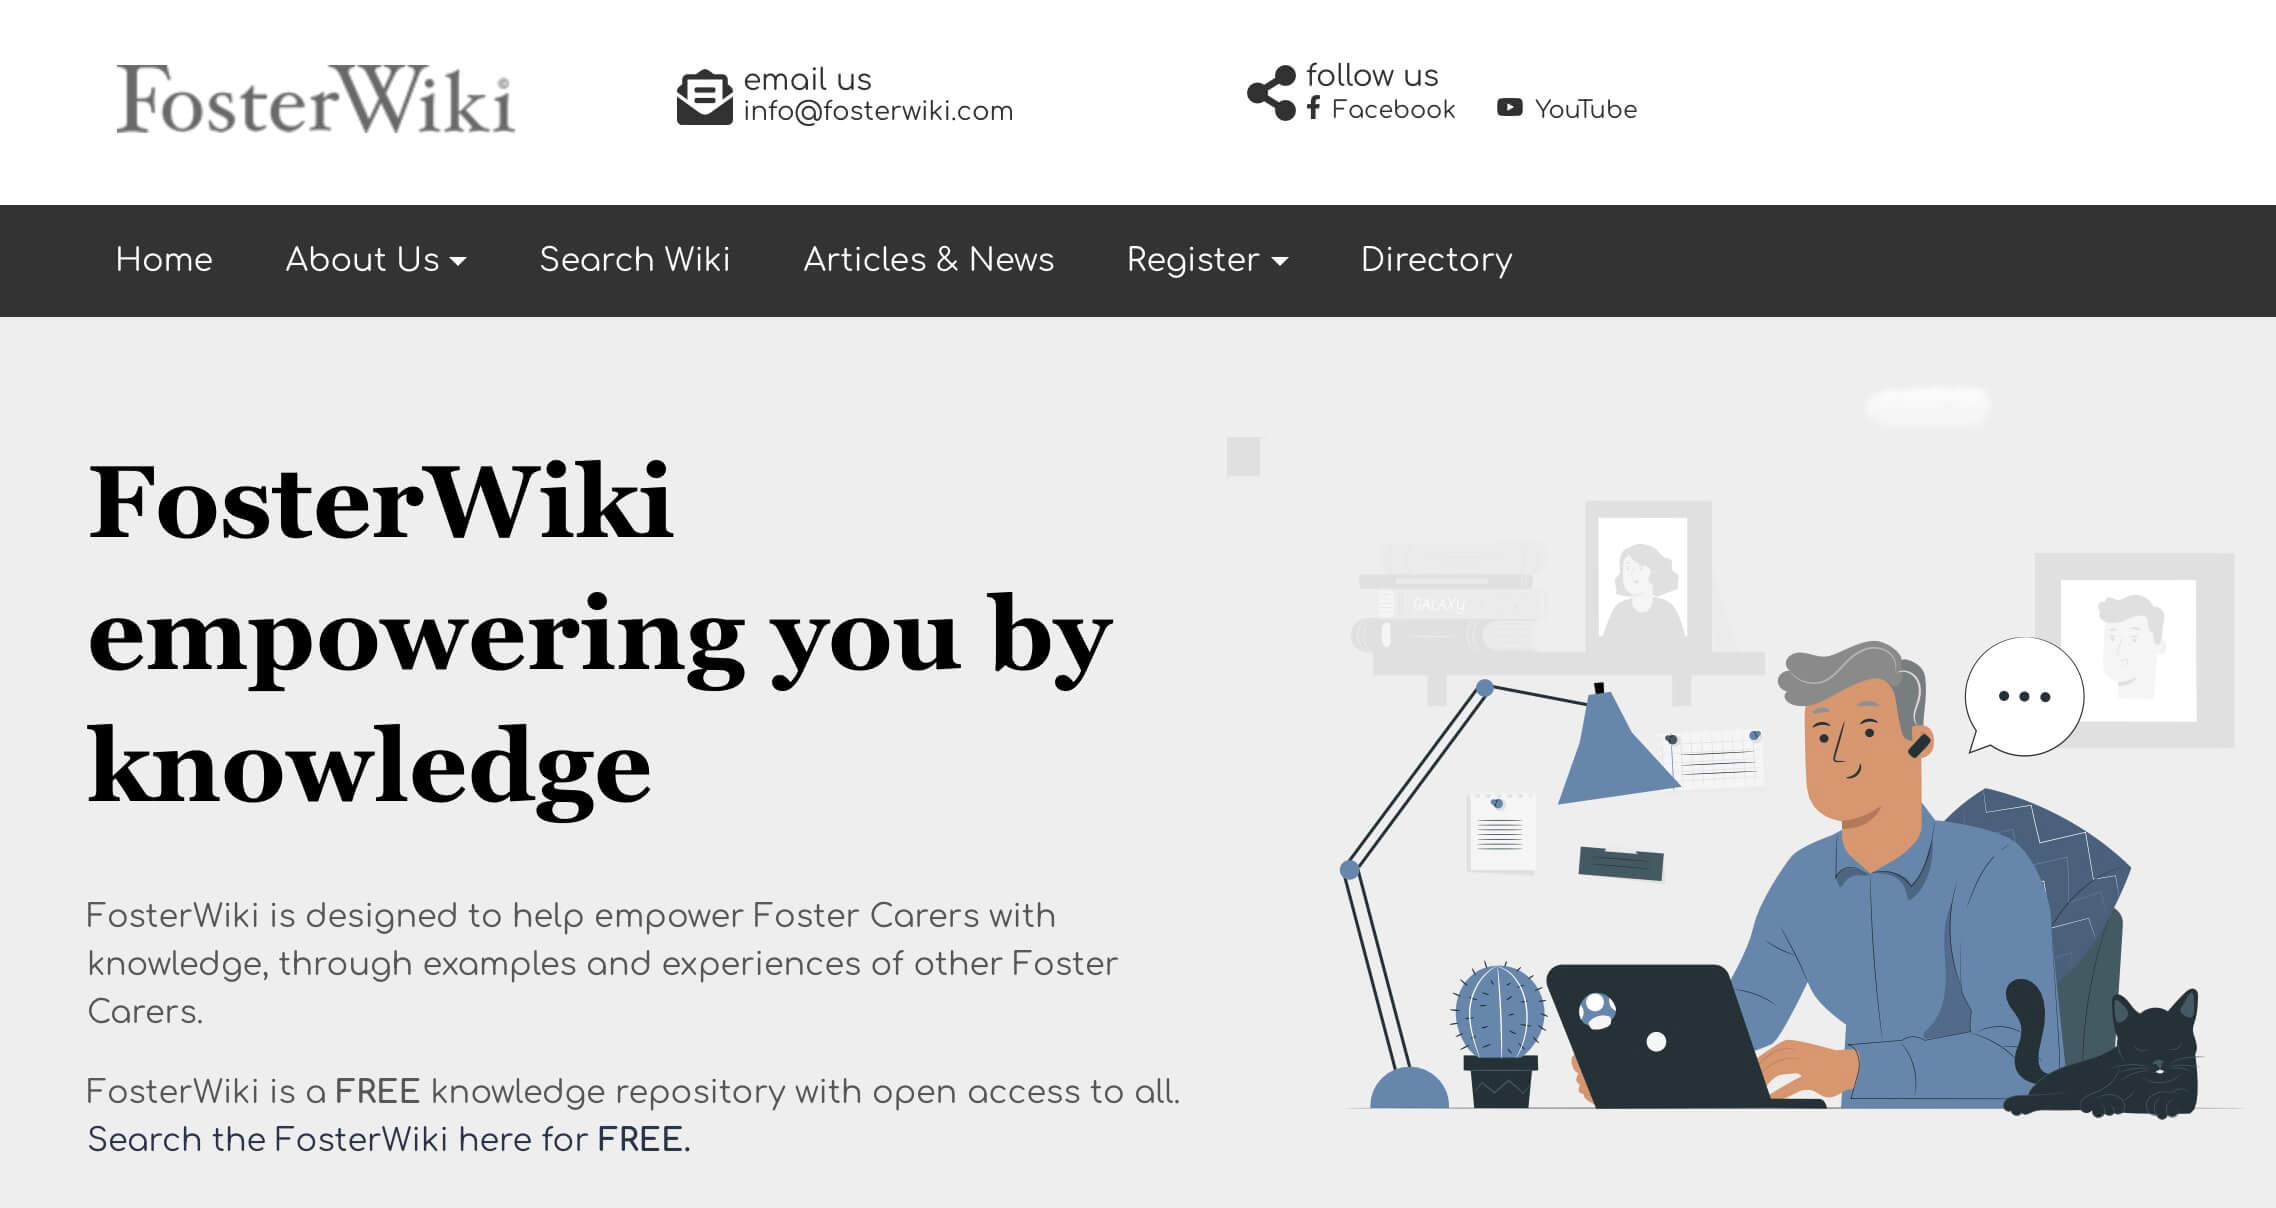 About FosterWiki, The story, mission, people and ethos